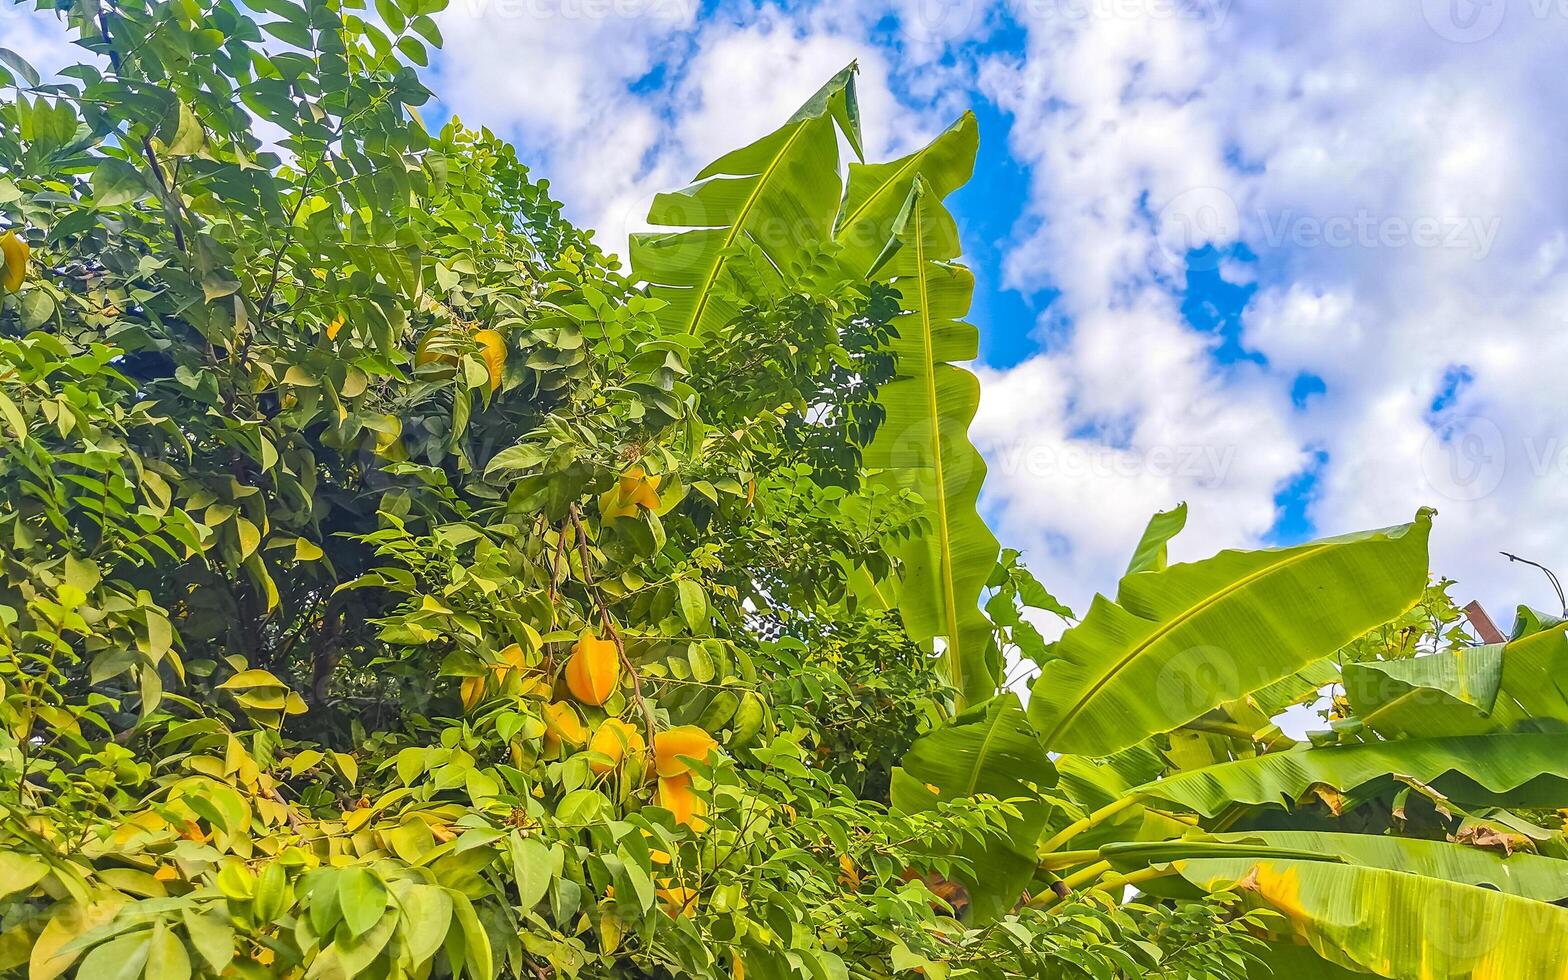 Star fruit tree with fruit on it green leaves Mexico. photo